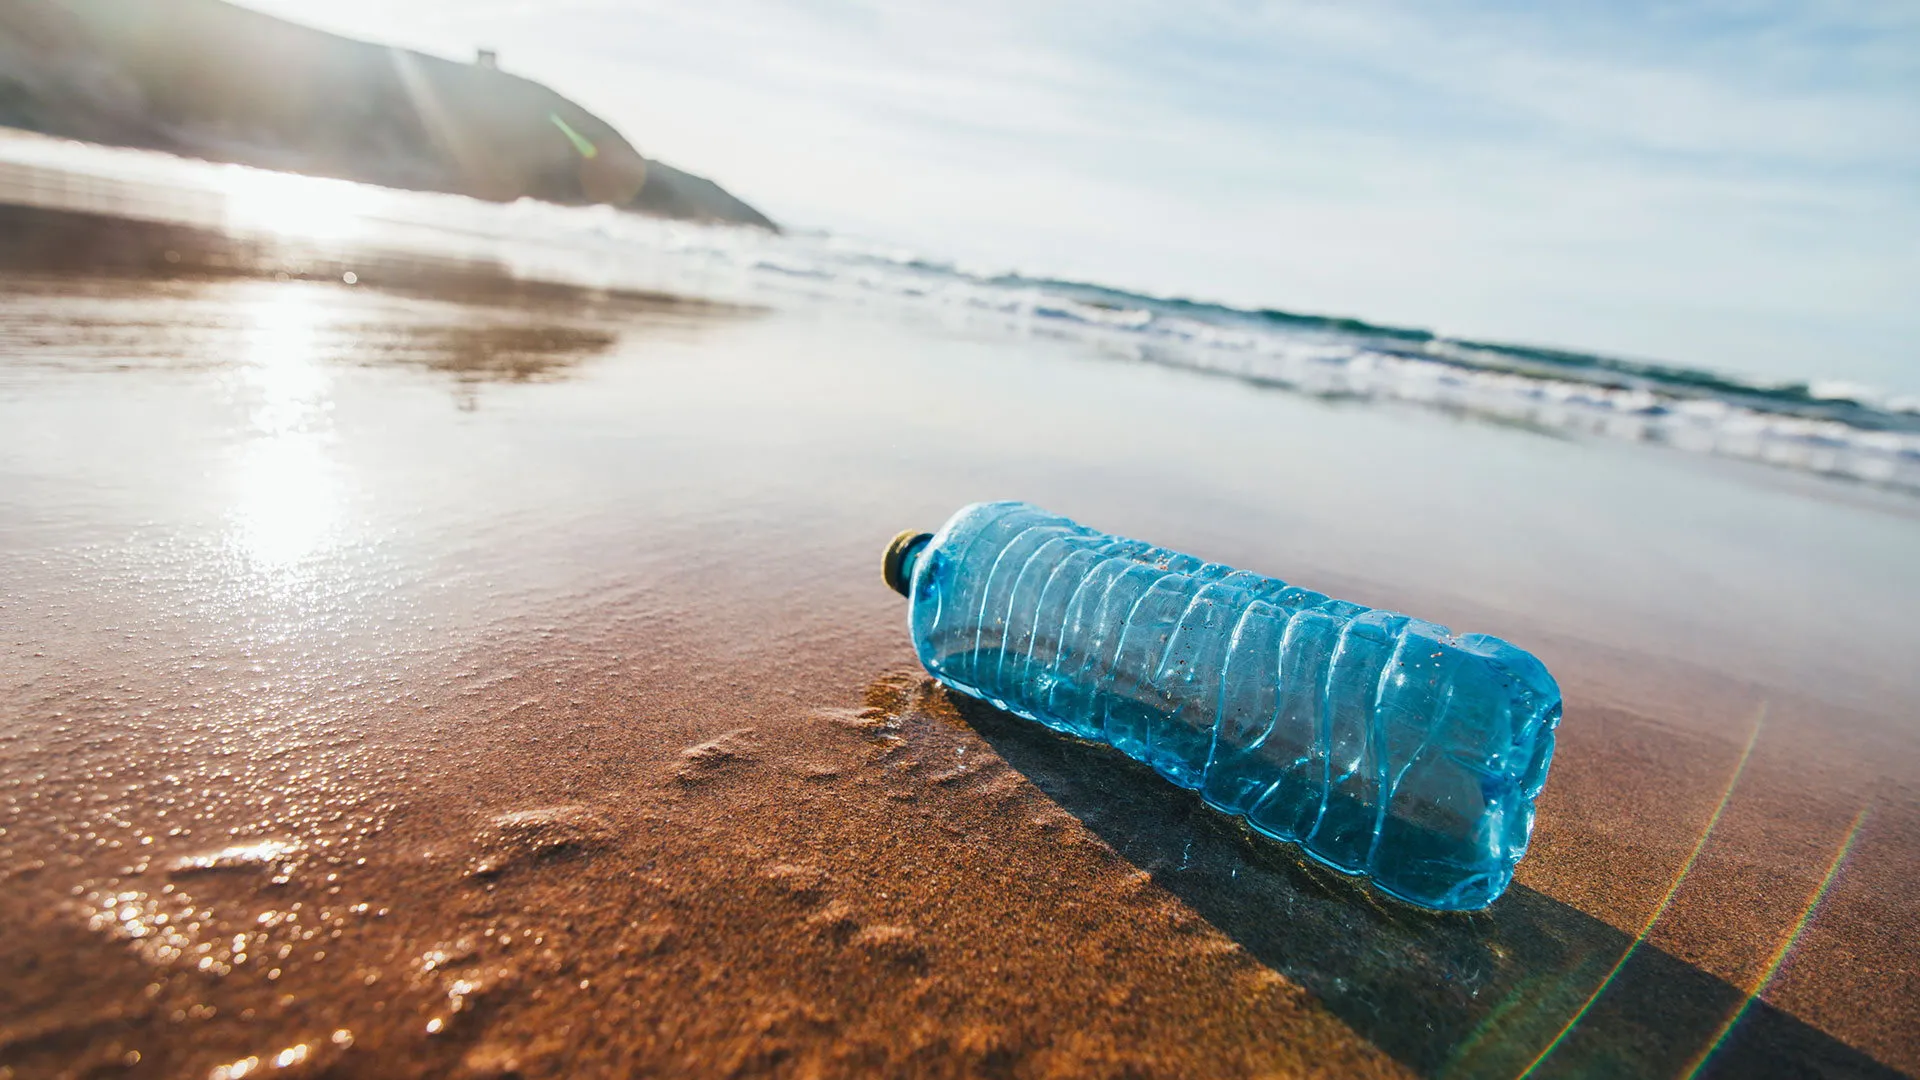 Less Plastic Packaging Means More in the Circular Economy >Dassault Systèmes